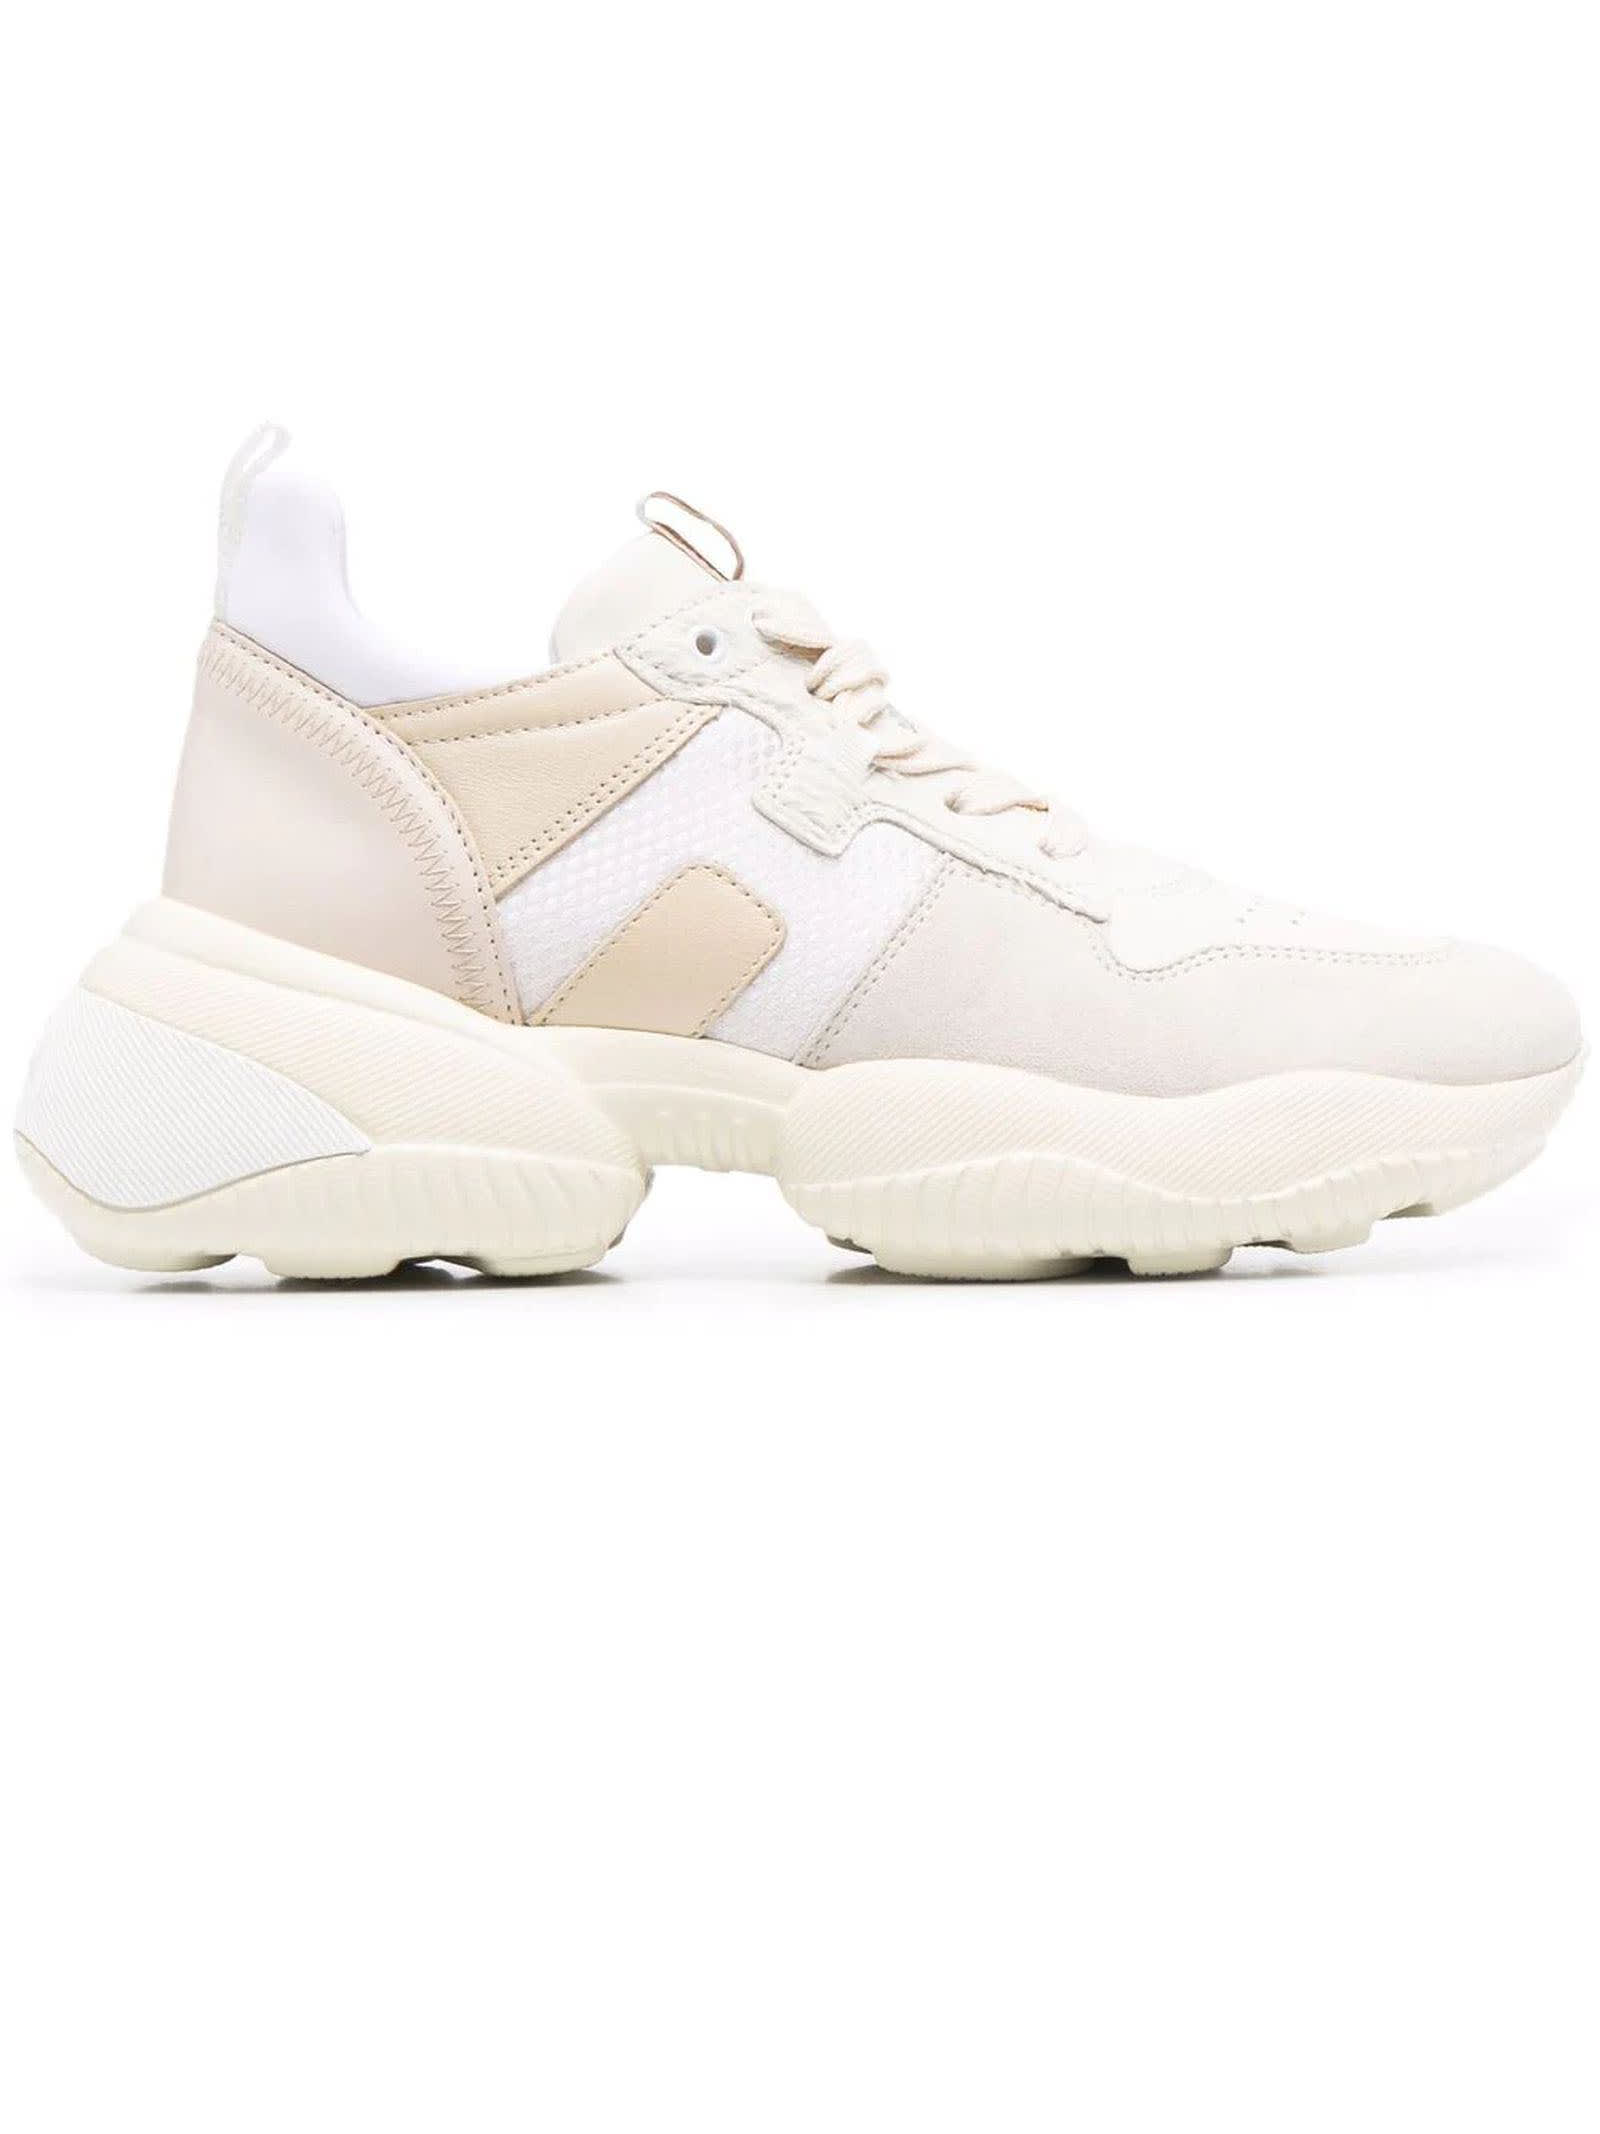 Hogan Interaction Sneakers Ivory